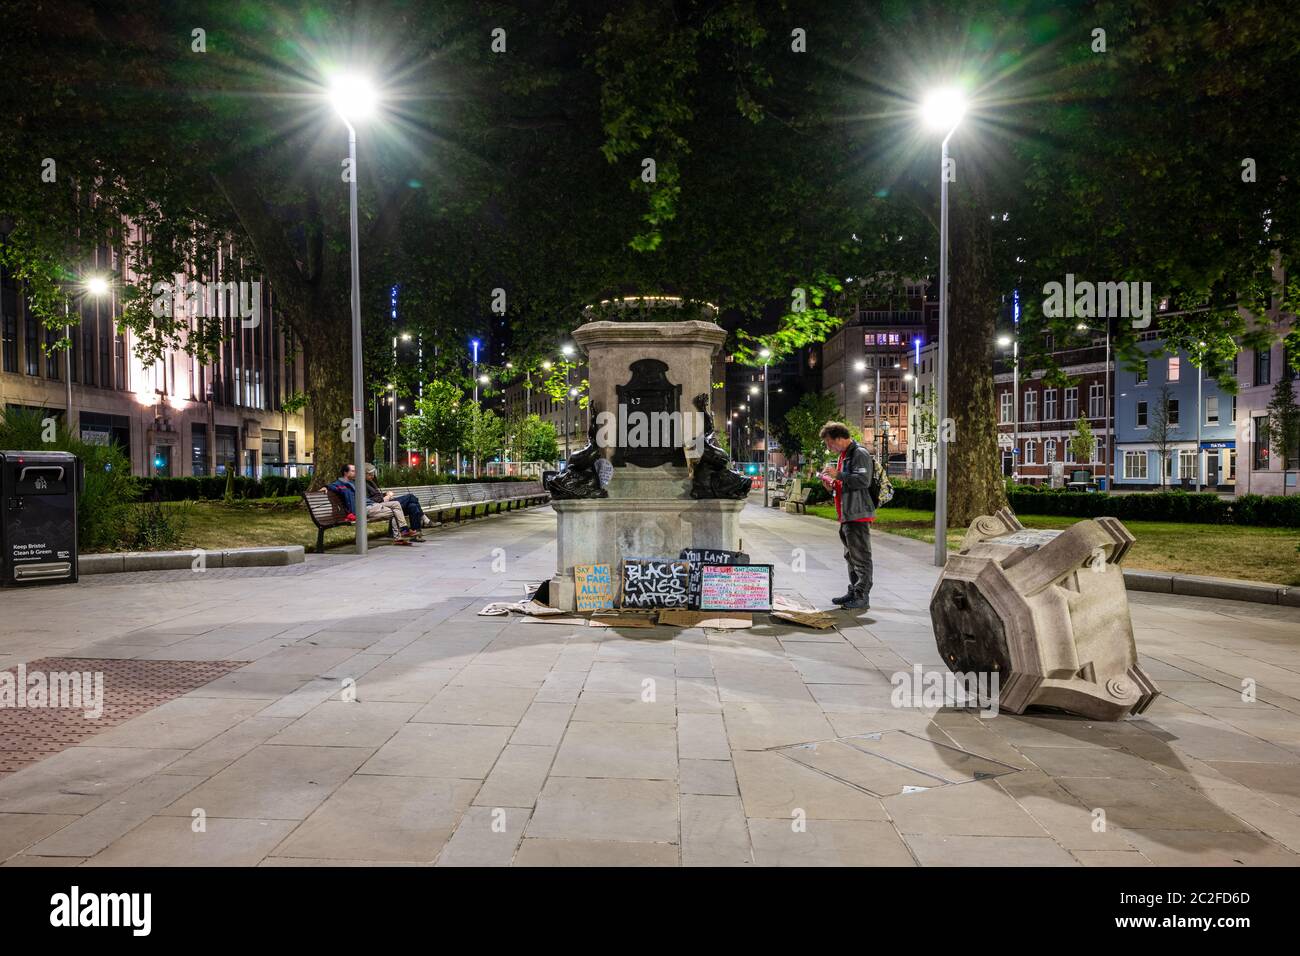 Bristol, England, UK - June 8, 2020: People passing the plinth of the toppled statue of slave trader Edward Colston in Bristol read and leave placards Stock Photo